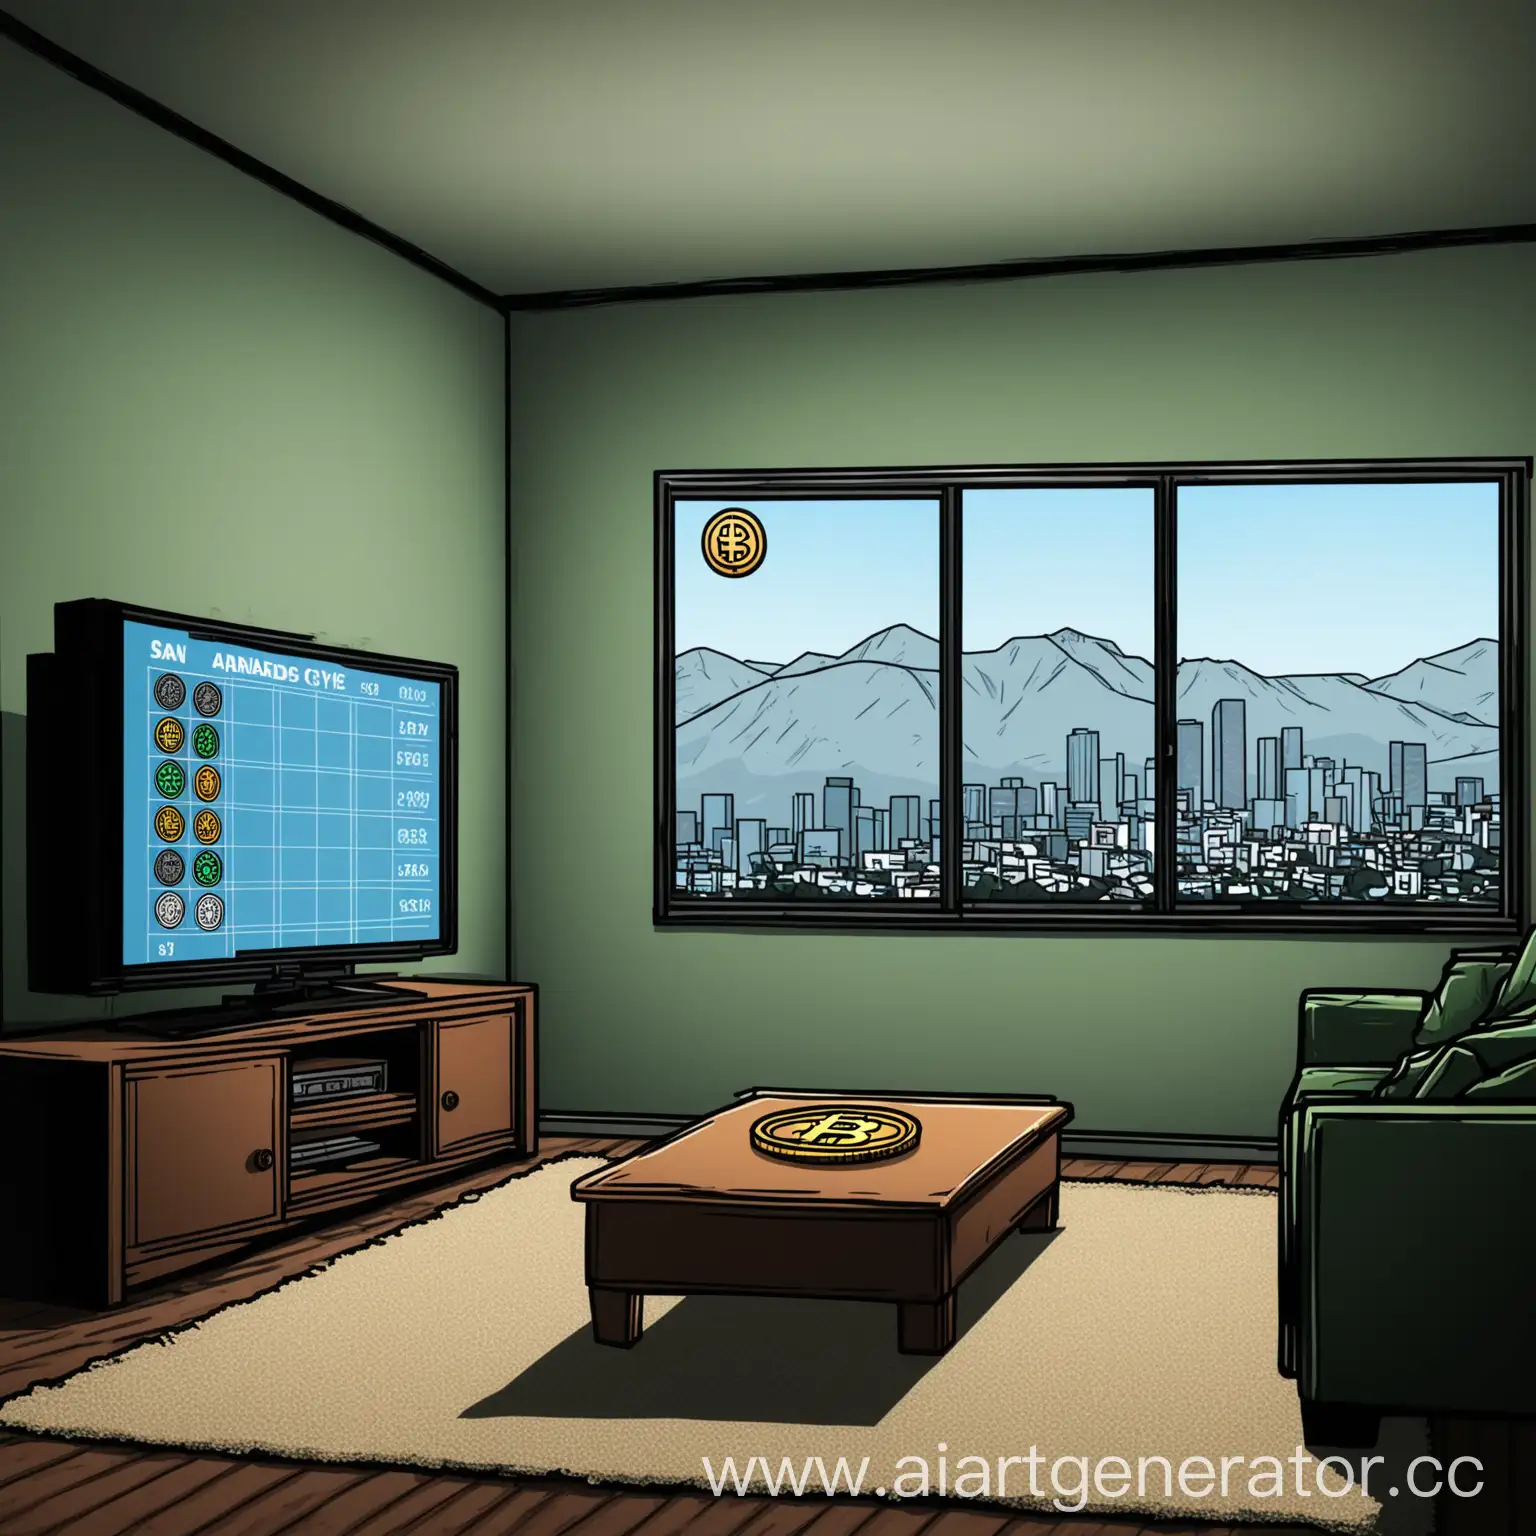 Minimalistic-Apartment-Interior-with-Cryptocurrency-Chart-on-TV-GTA-Style-View